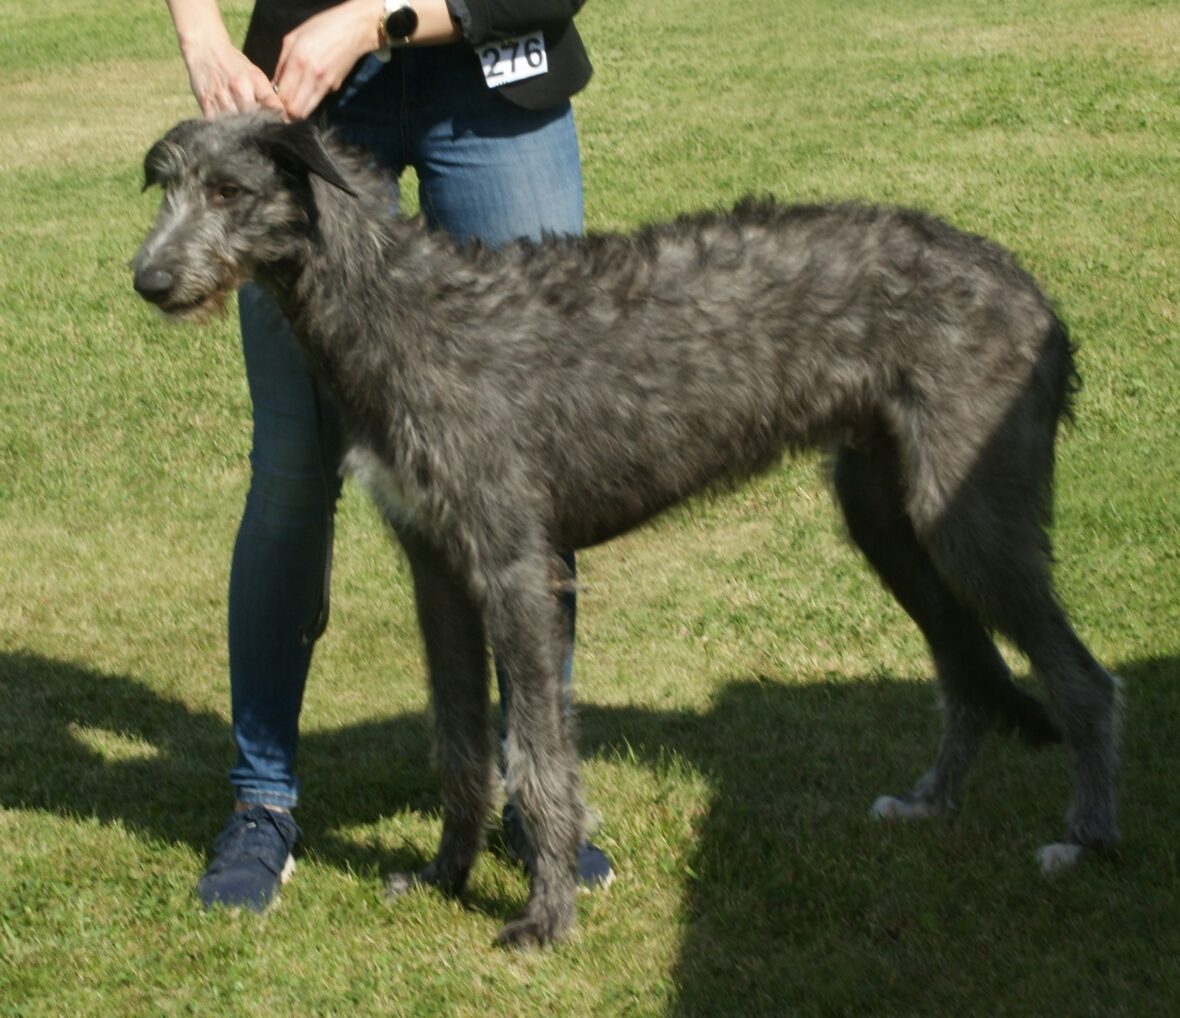 Close up of a Scottish Deerhound standing on a field of grass, Scottish Deerhounds are among the dogs breeds with the shortest lifespans